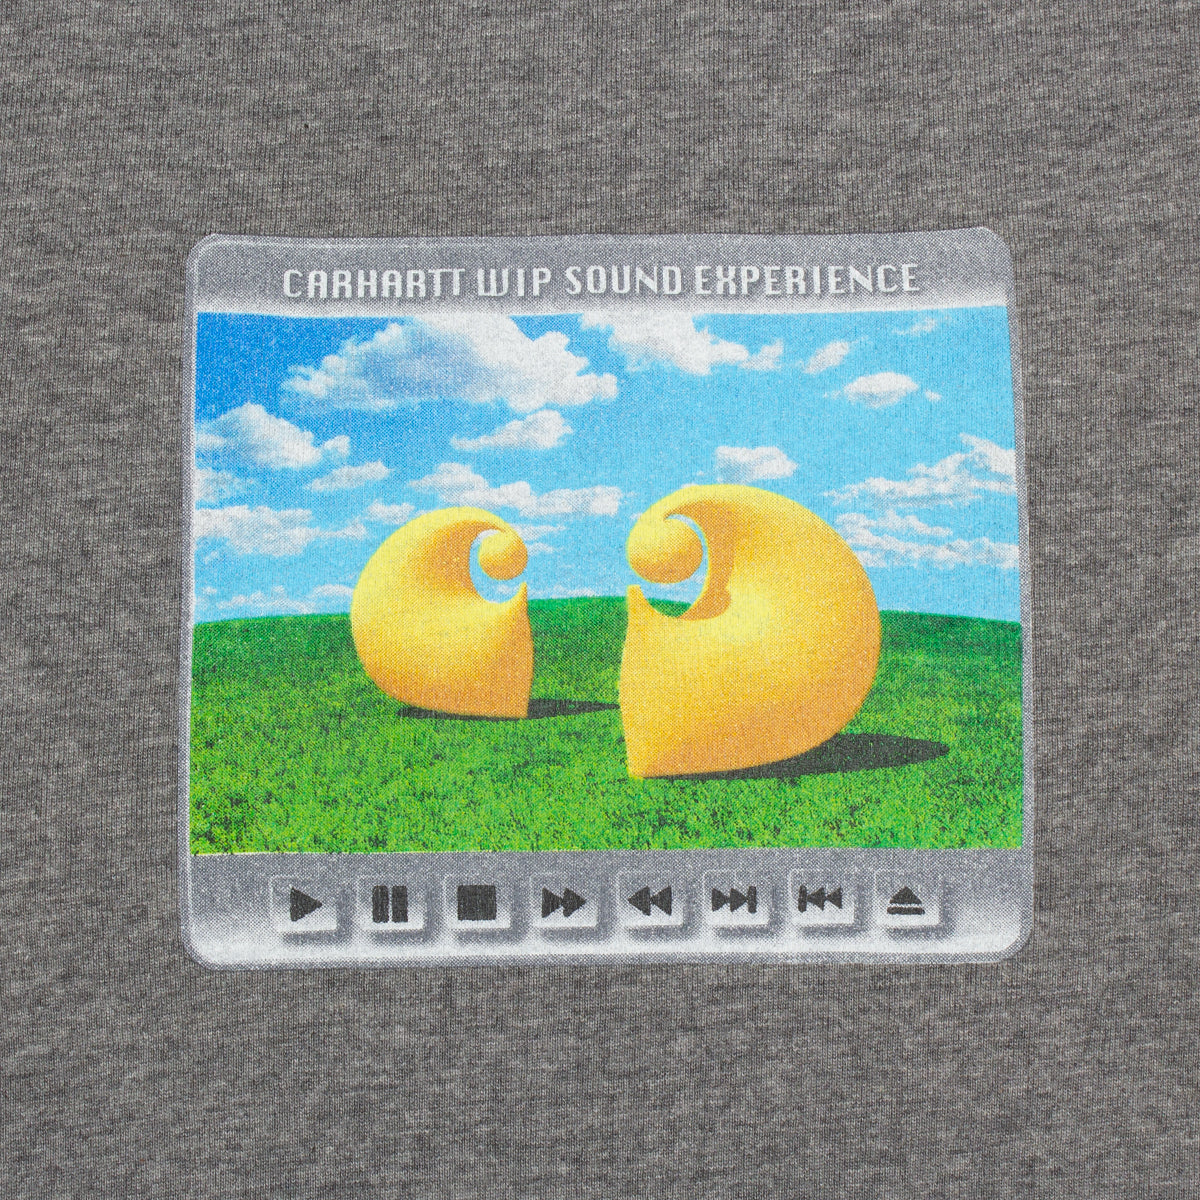 Carhartt WIP S/S Sound Experience T-Shirt